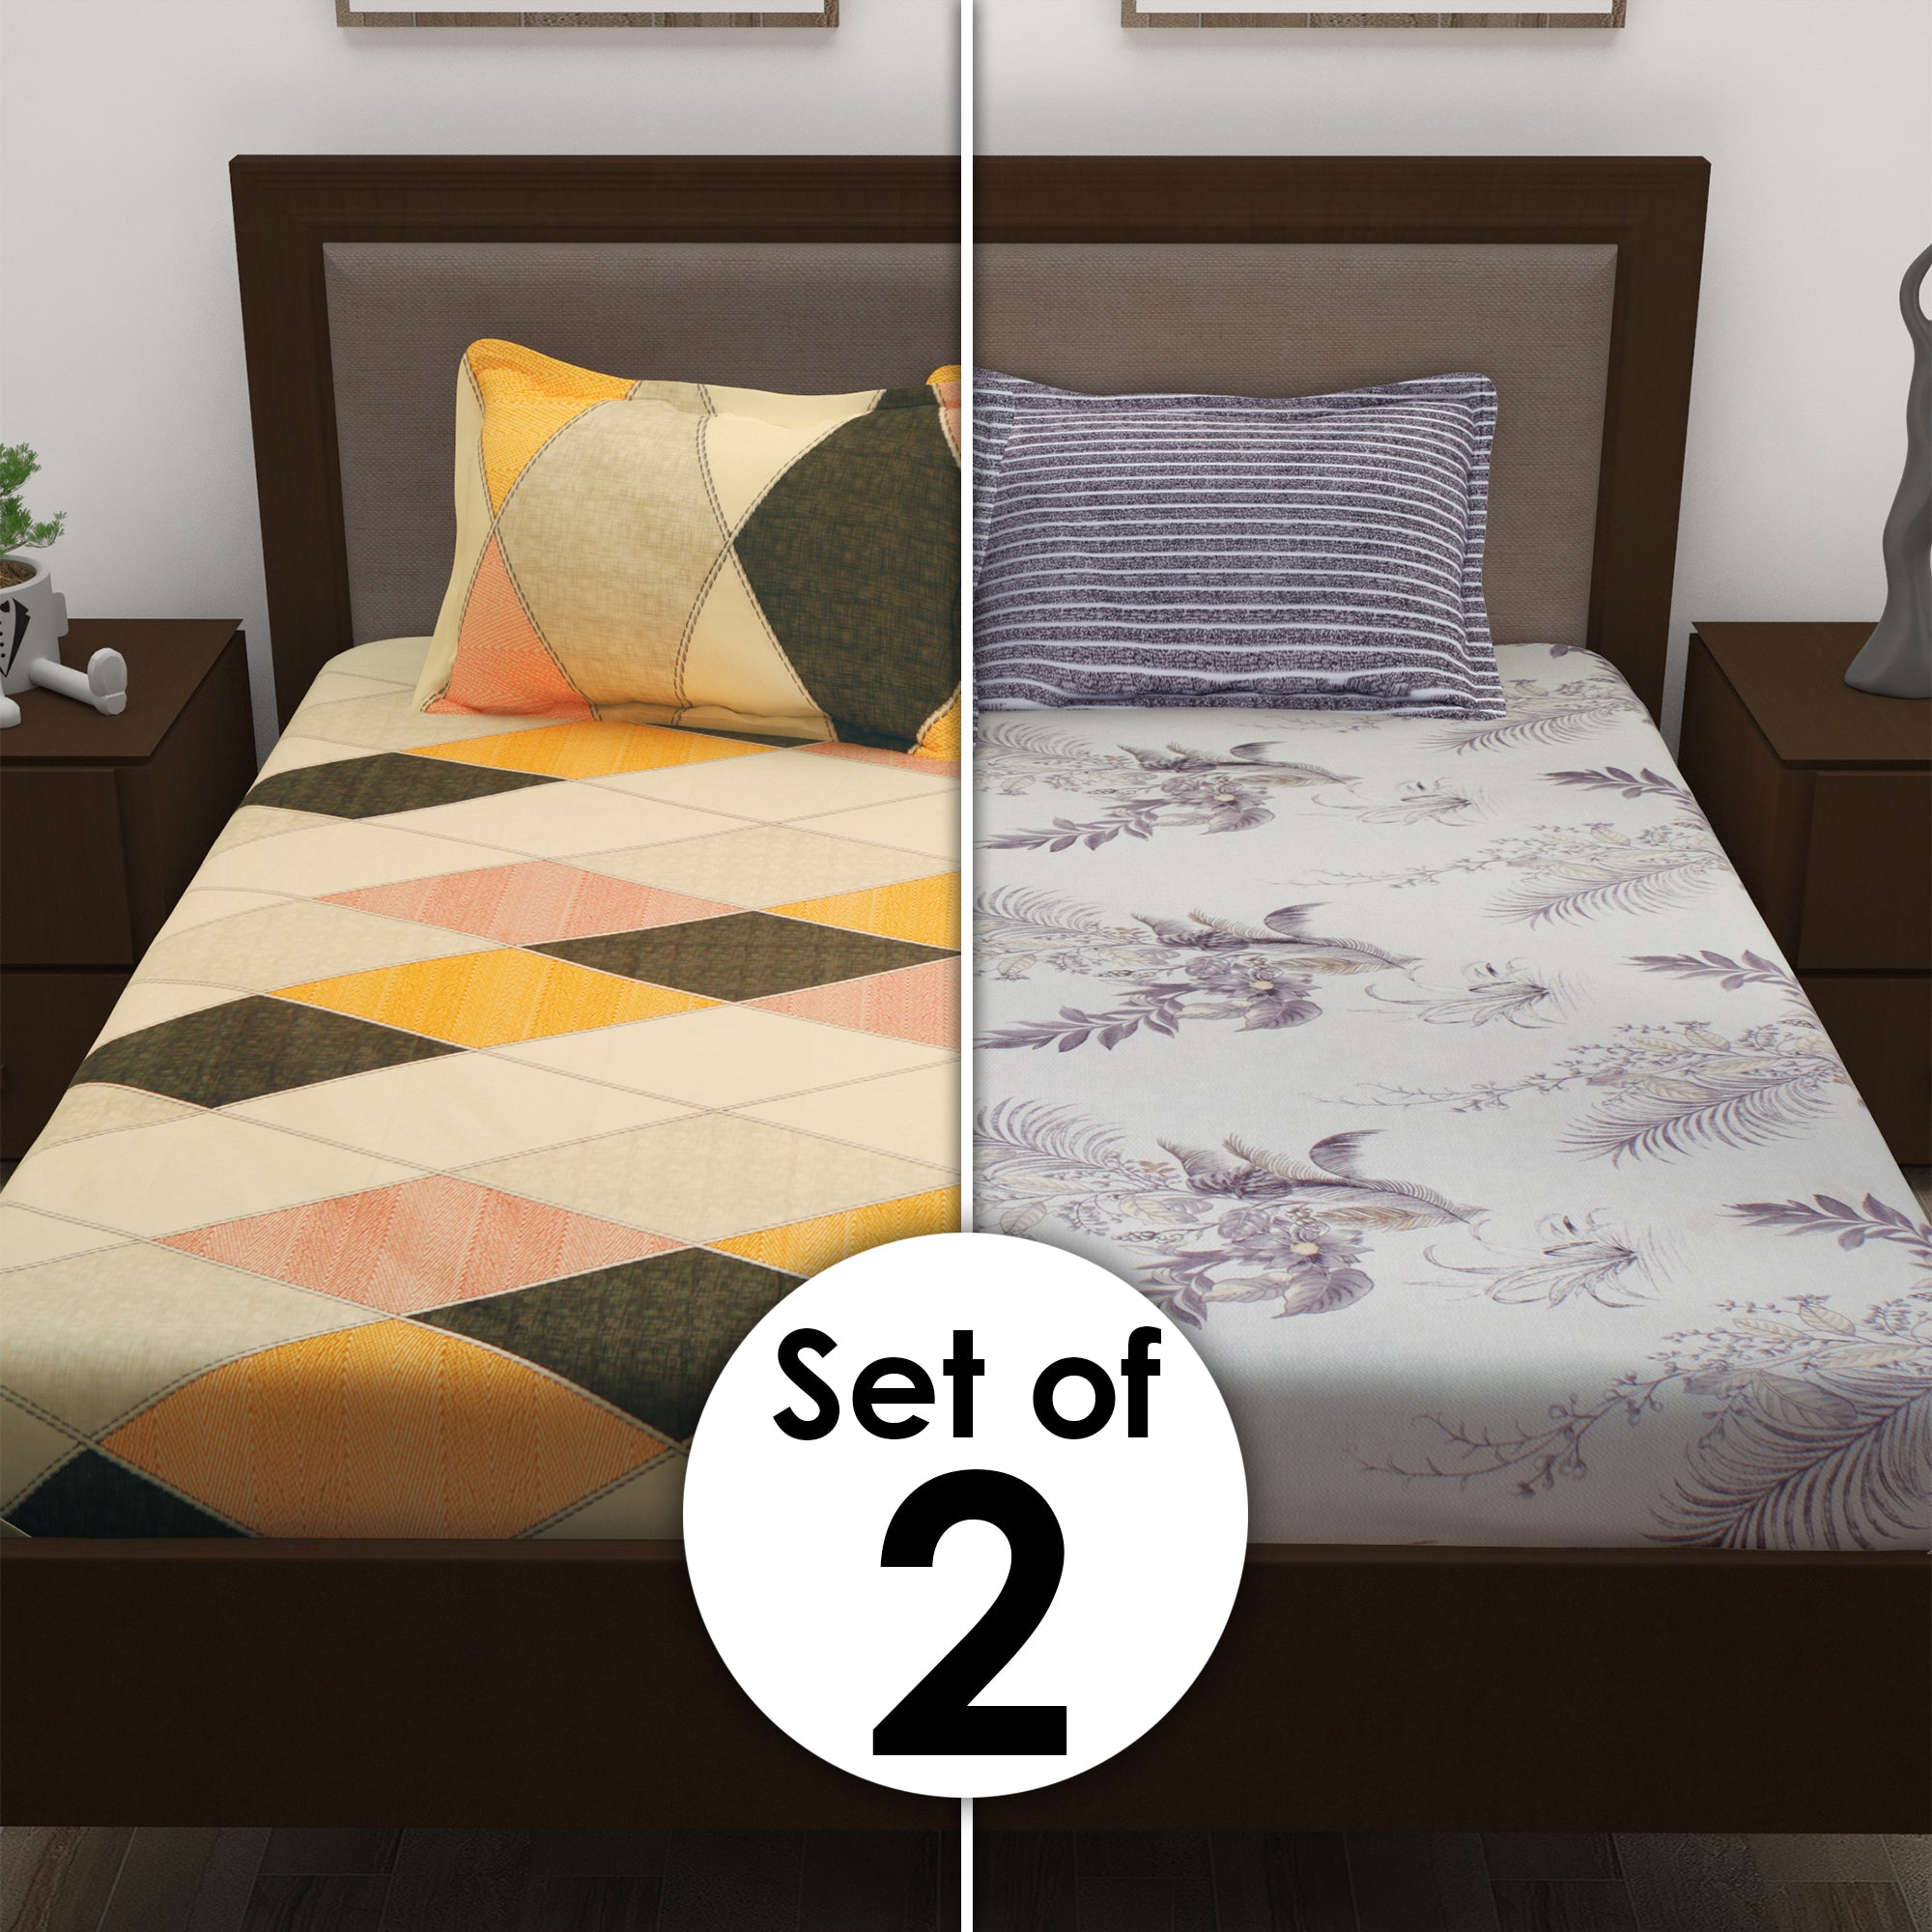 Metro Cotton Double Bedsheets Combo - 186 TC- Muticolor and Grey - Fancy Mix N Match Design and Floral